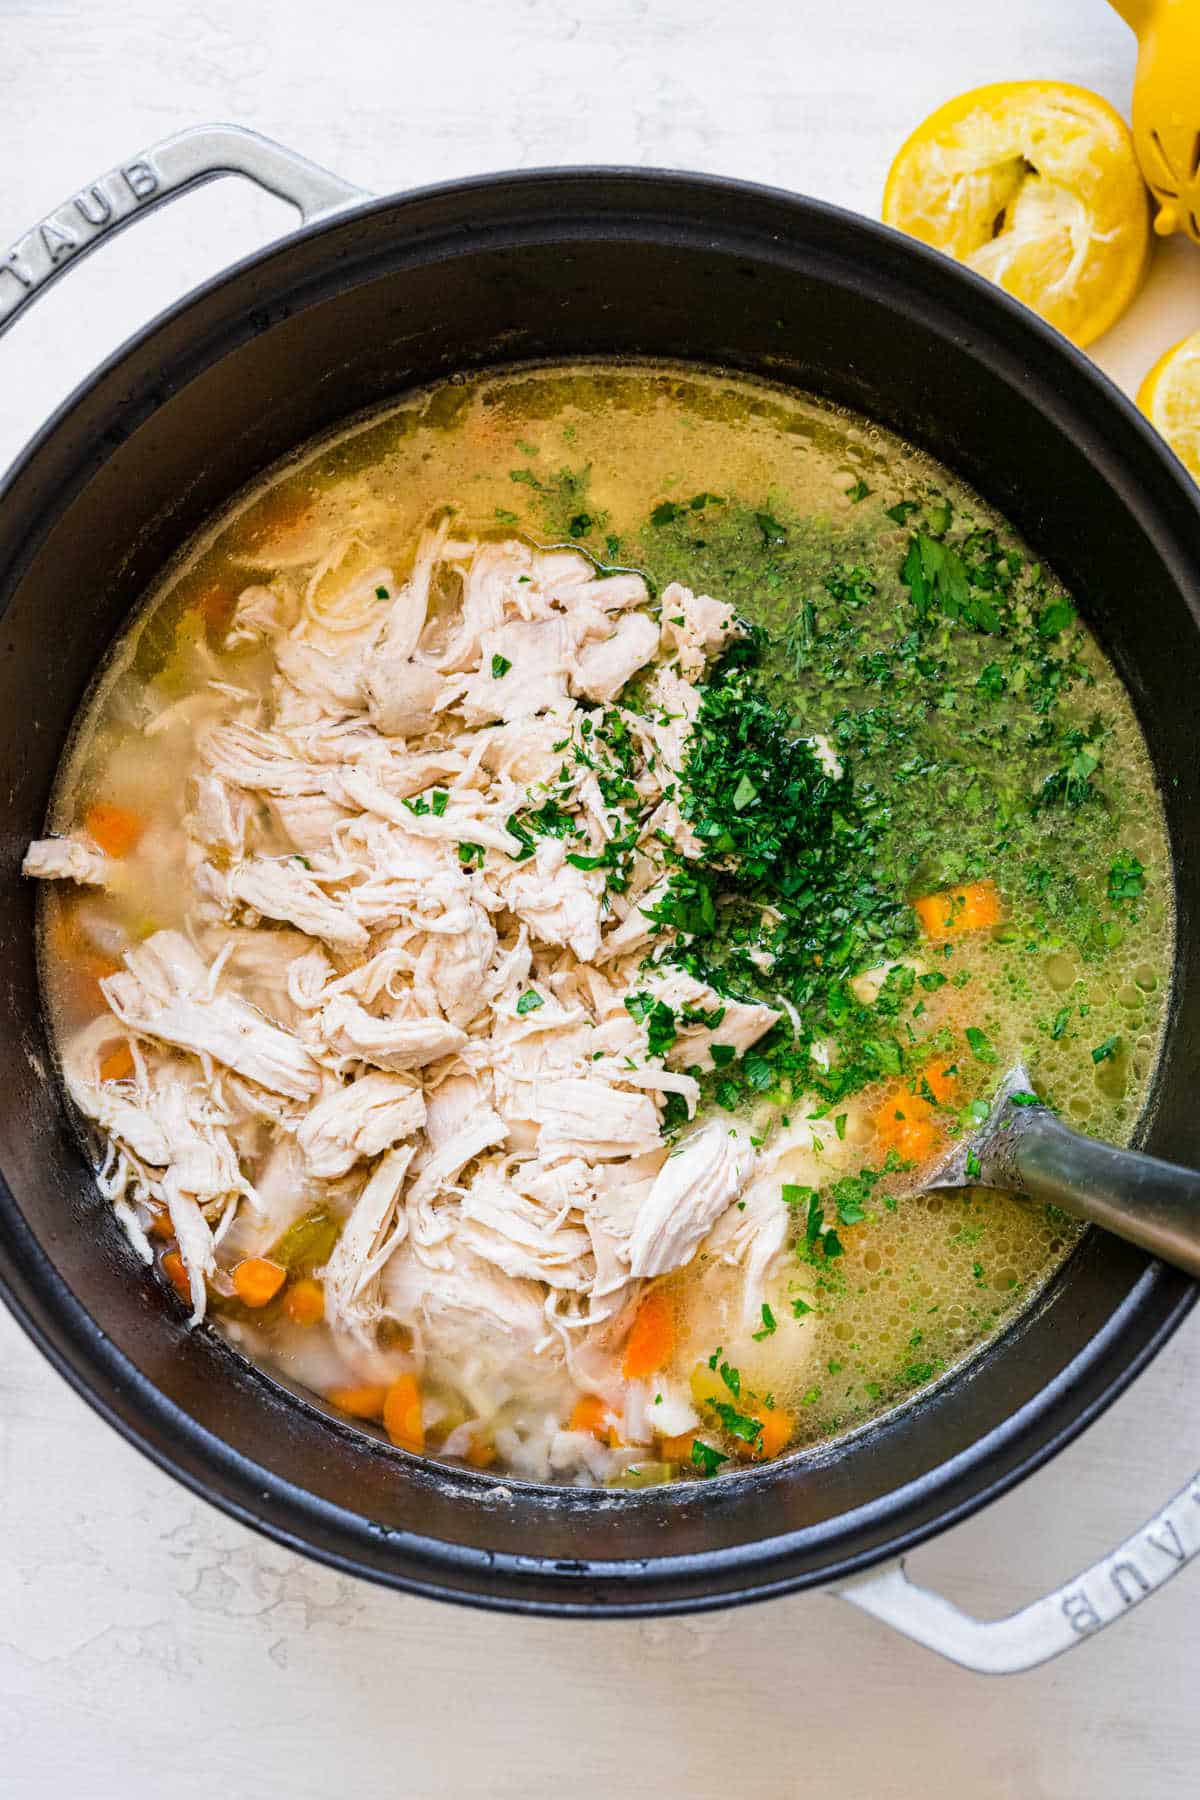 Added chicken parsley and dill to a pot oflemon chicken and rice soup.